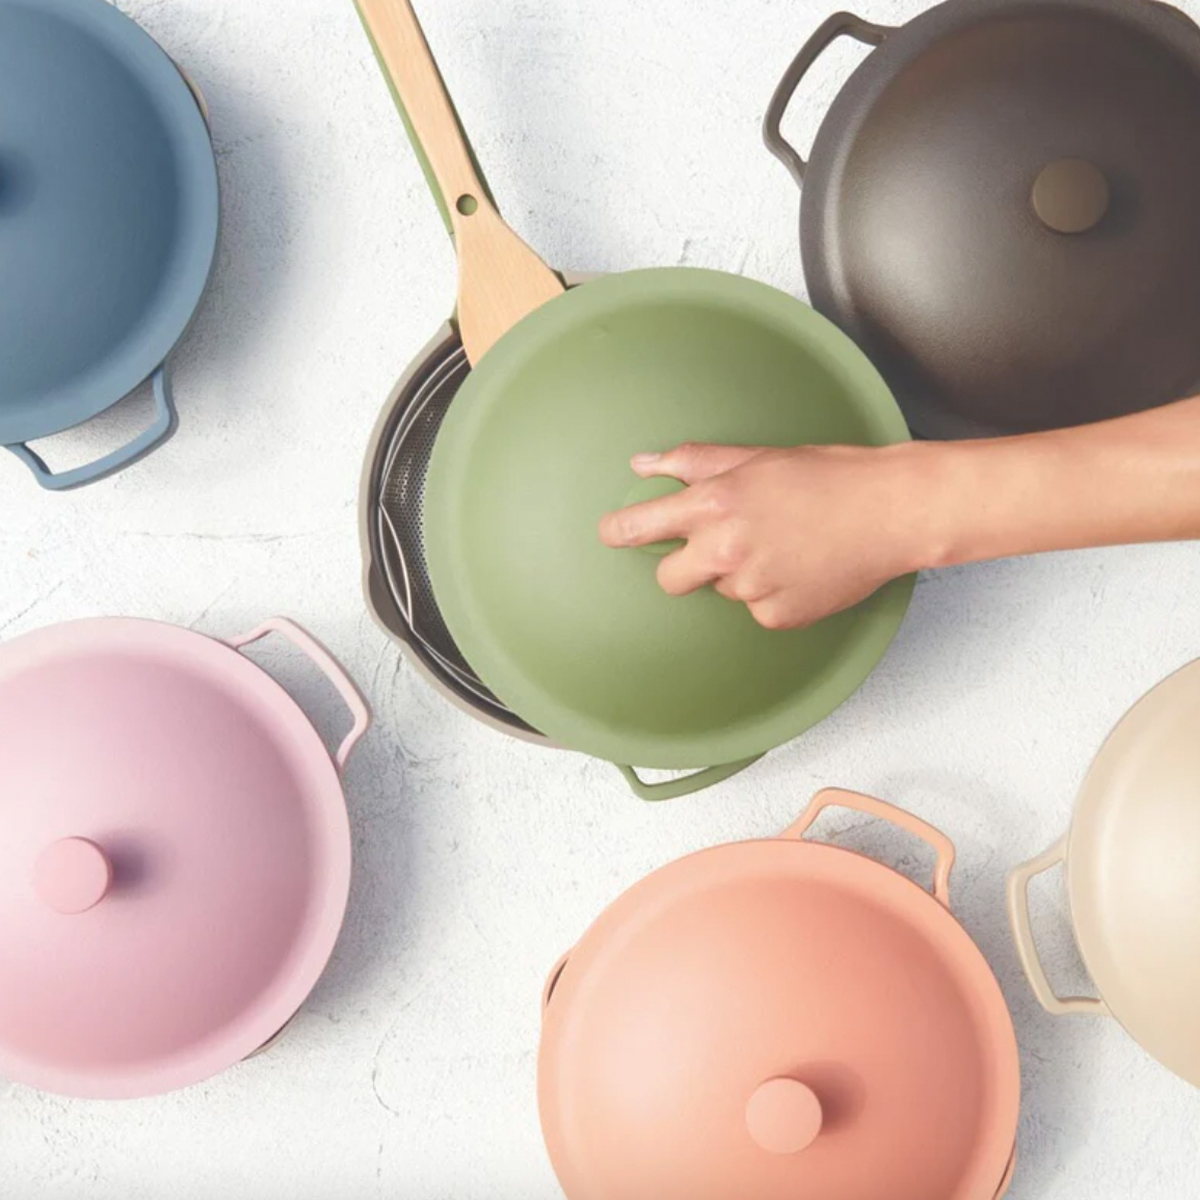 The Our Place Always Pan Sale Has Discounts up to 25% Off—Here's